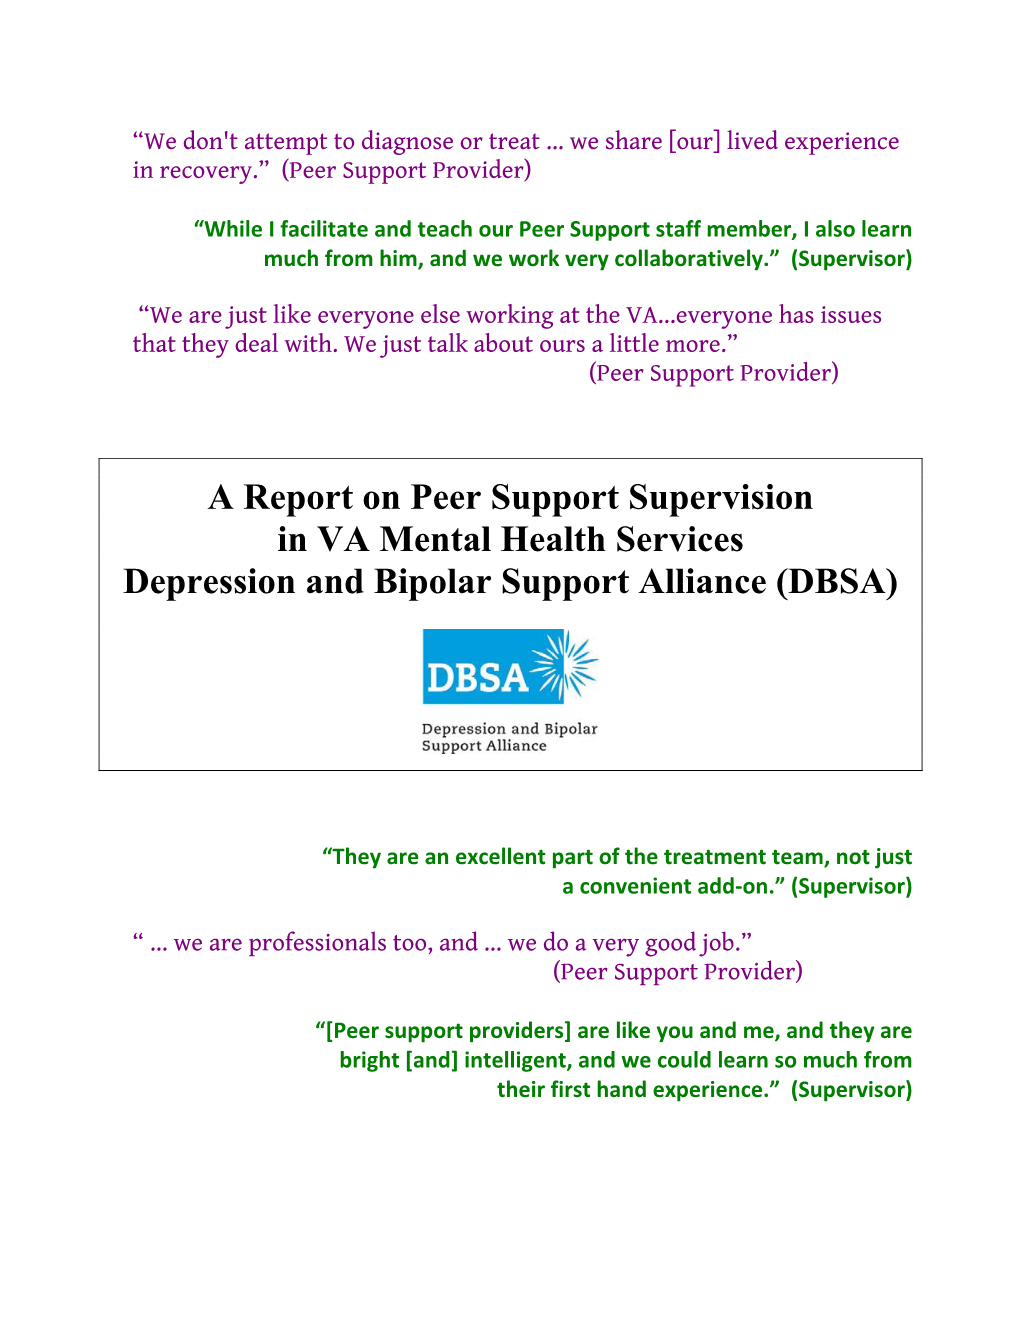 A Report on Peer Support Supervision in VA Mental Health Services Depression and Bipolar Support Alliance (DBSA)